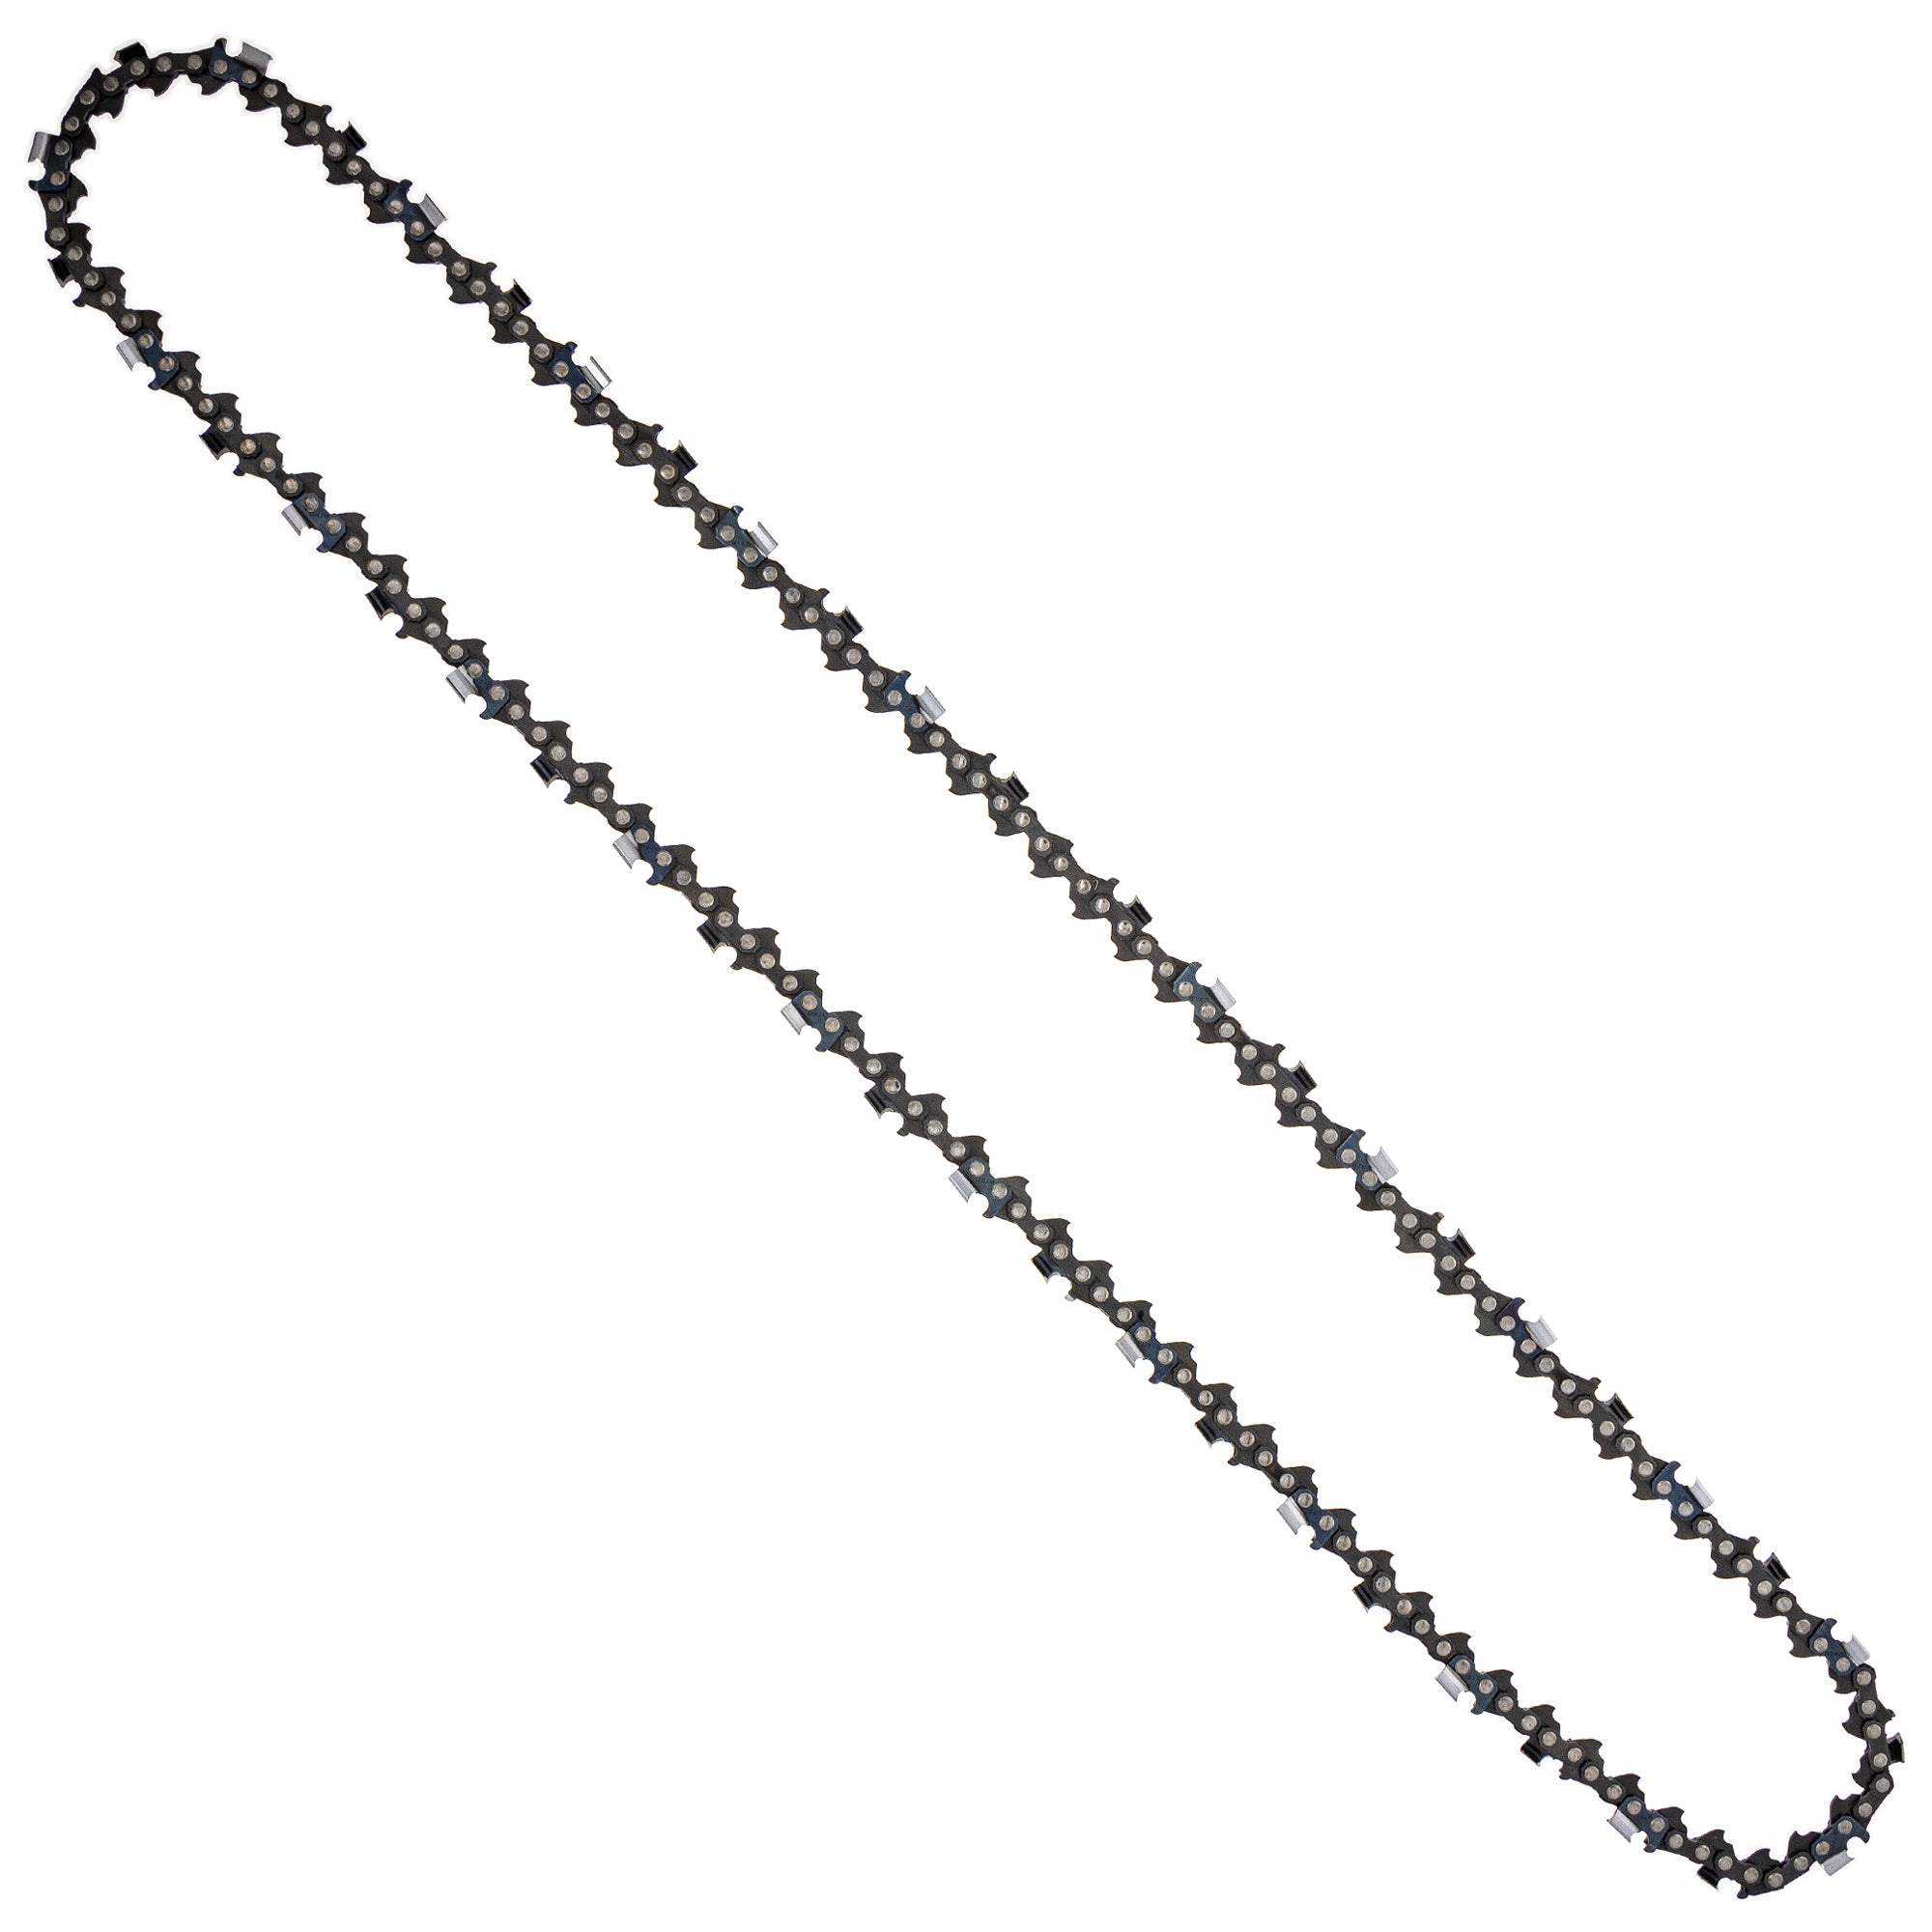 8TEN 810-CCC2352H Chain 10-Pack for zOTHER Oregon MS 066 064 056